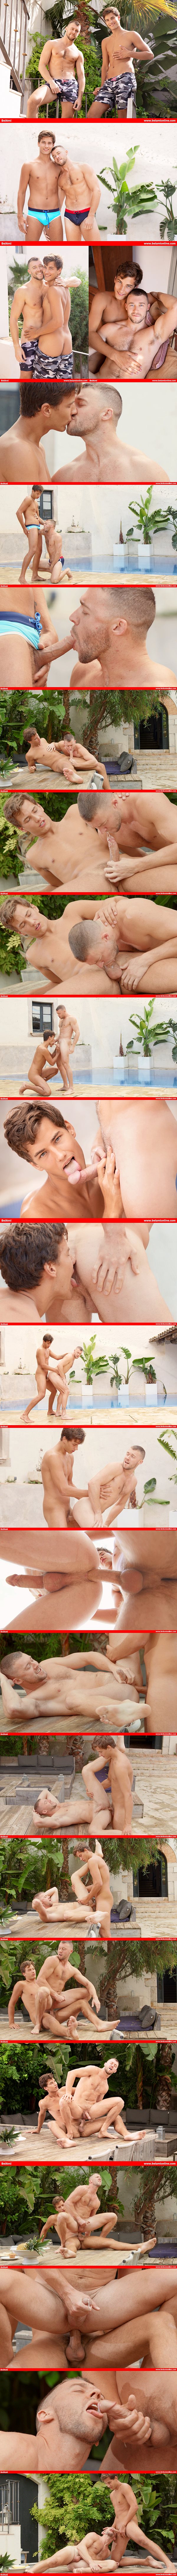 Blond Belami porn star Tom Houston barebacks Seancody model Justin before he fucks the cum out of Justin and cums in Justin's mouth at Belamionline 01